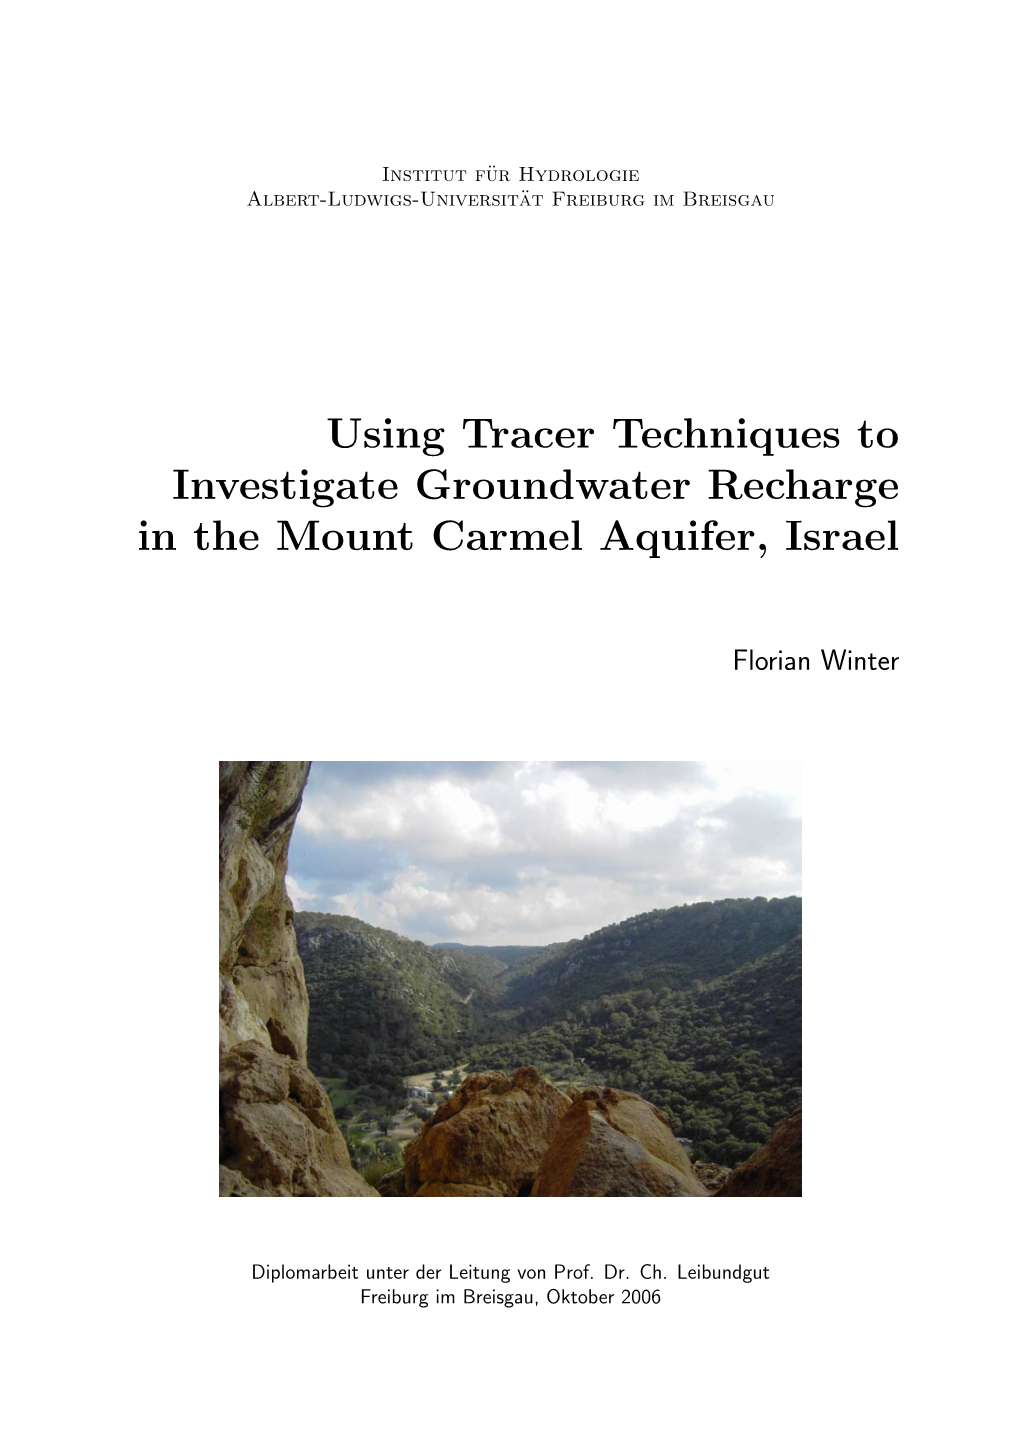 Using Tracer Techniques to Investigate Groundwater Recharge in the Mount Carmel Aquifer, Israel